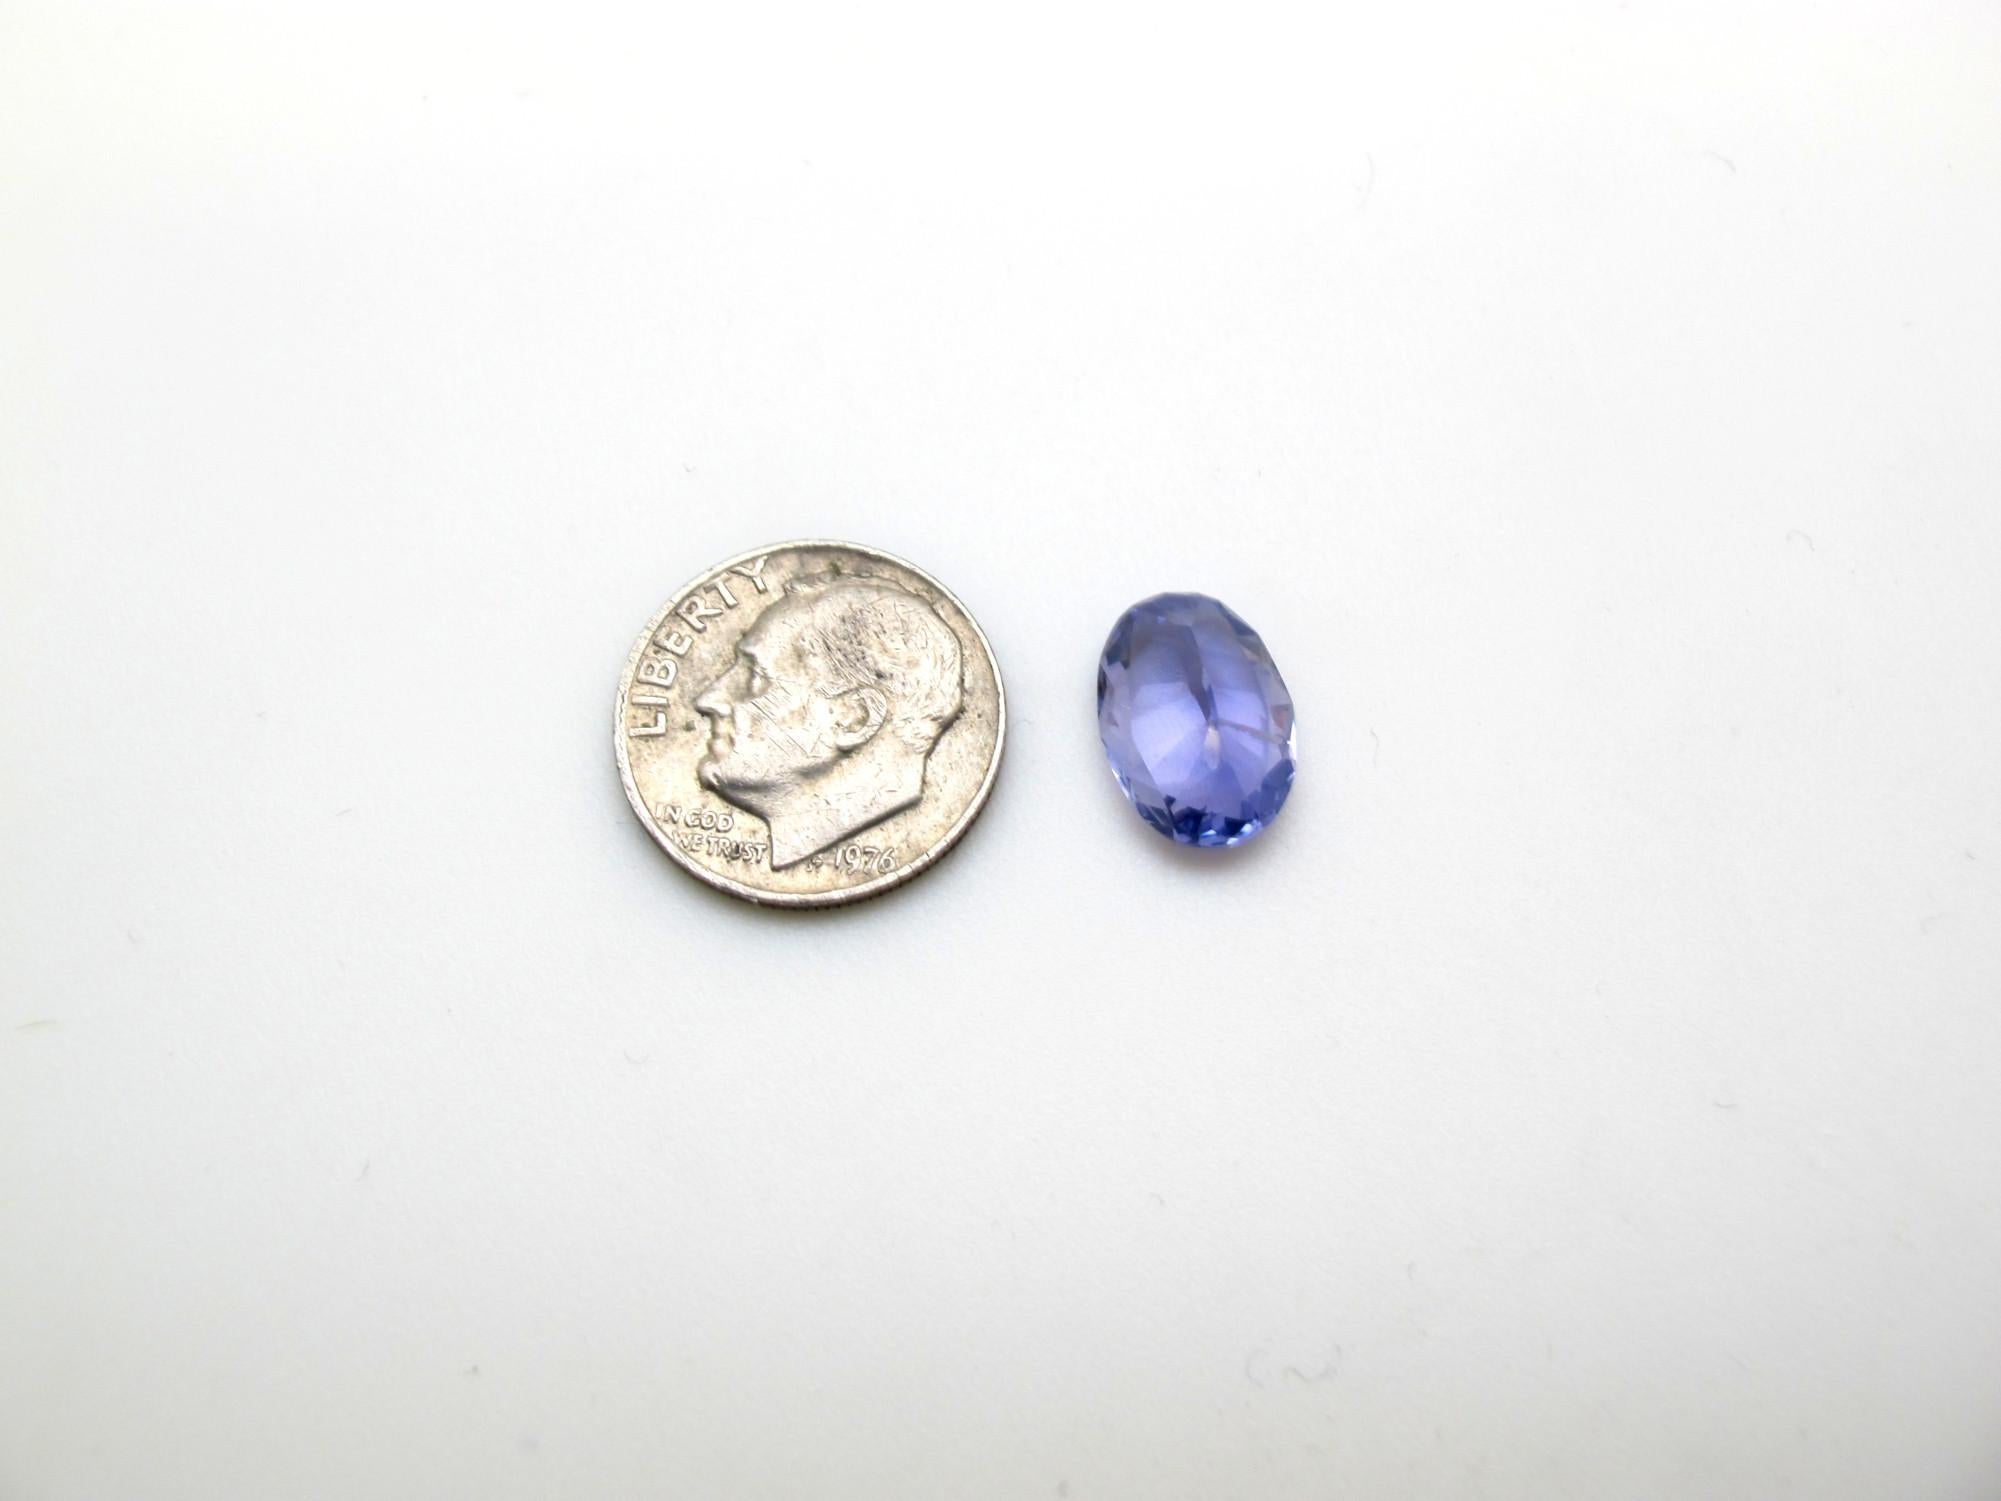 This is a very clean and bright sapphire with a violetish blue color. It measures 12.39 x 8.81 x 5.55 millimeters and weighs 4.67 carats. It is accompanied by Gemological Institute of America Report #2201169943 that states that it is unheated. The